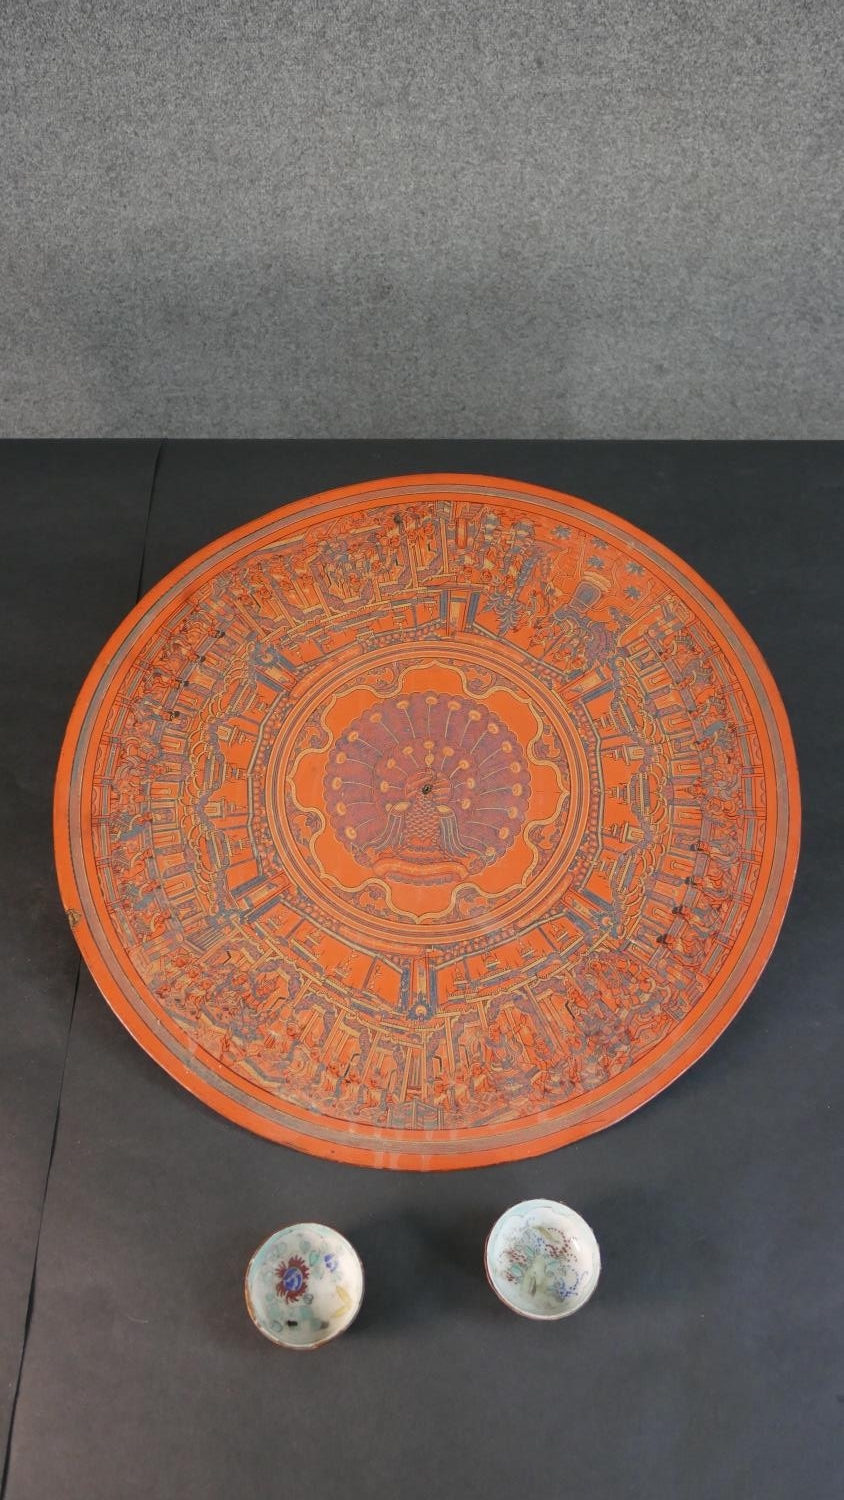 A 19th century engraved lacquer mandala, decorated with figures of Buddha and a peacock to the